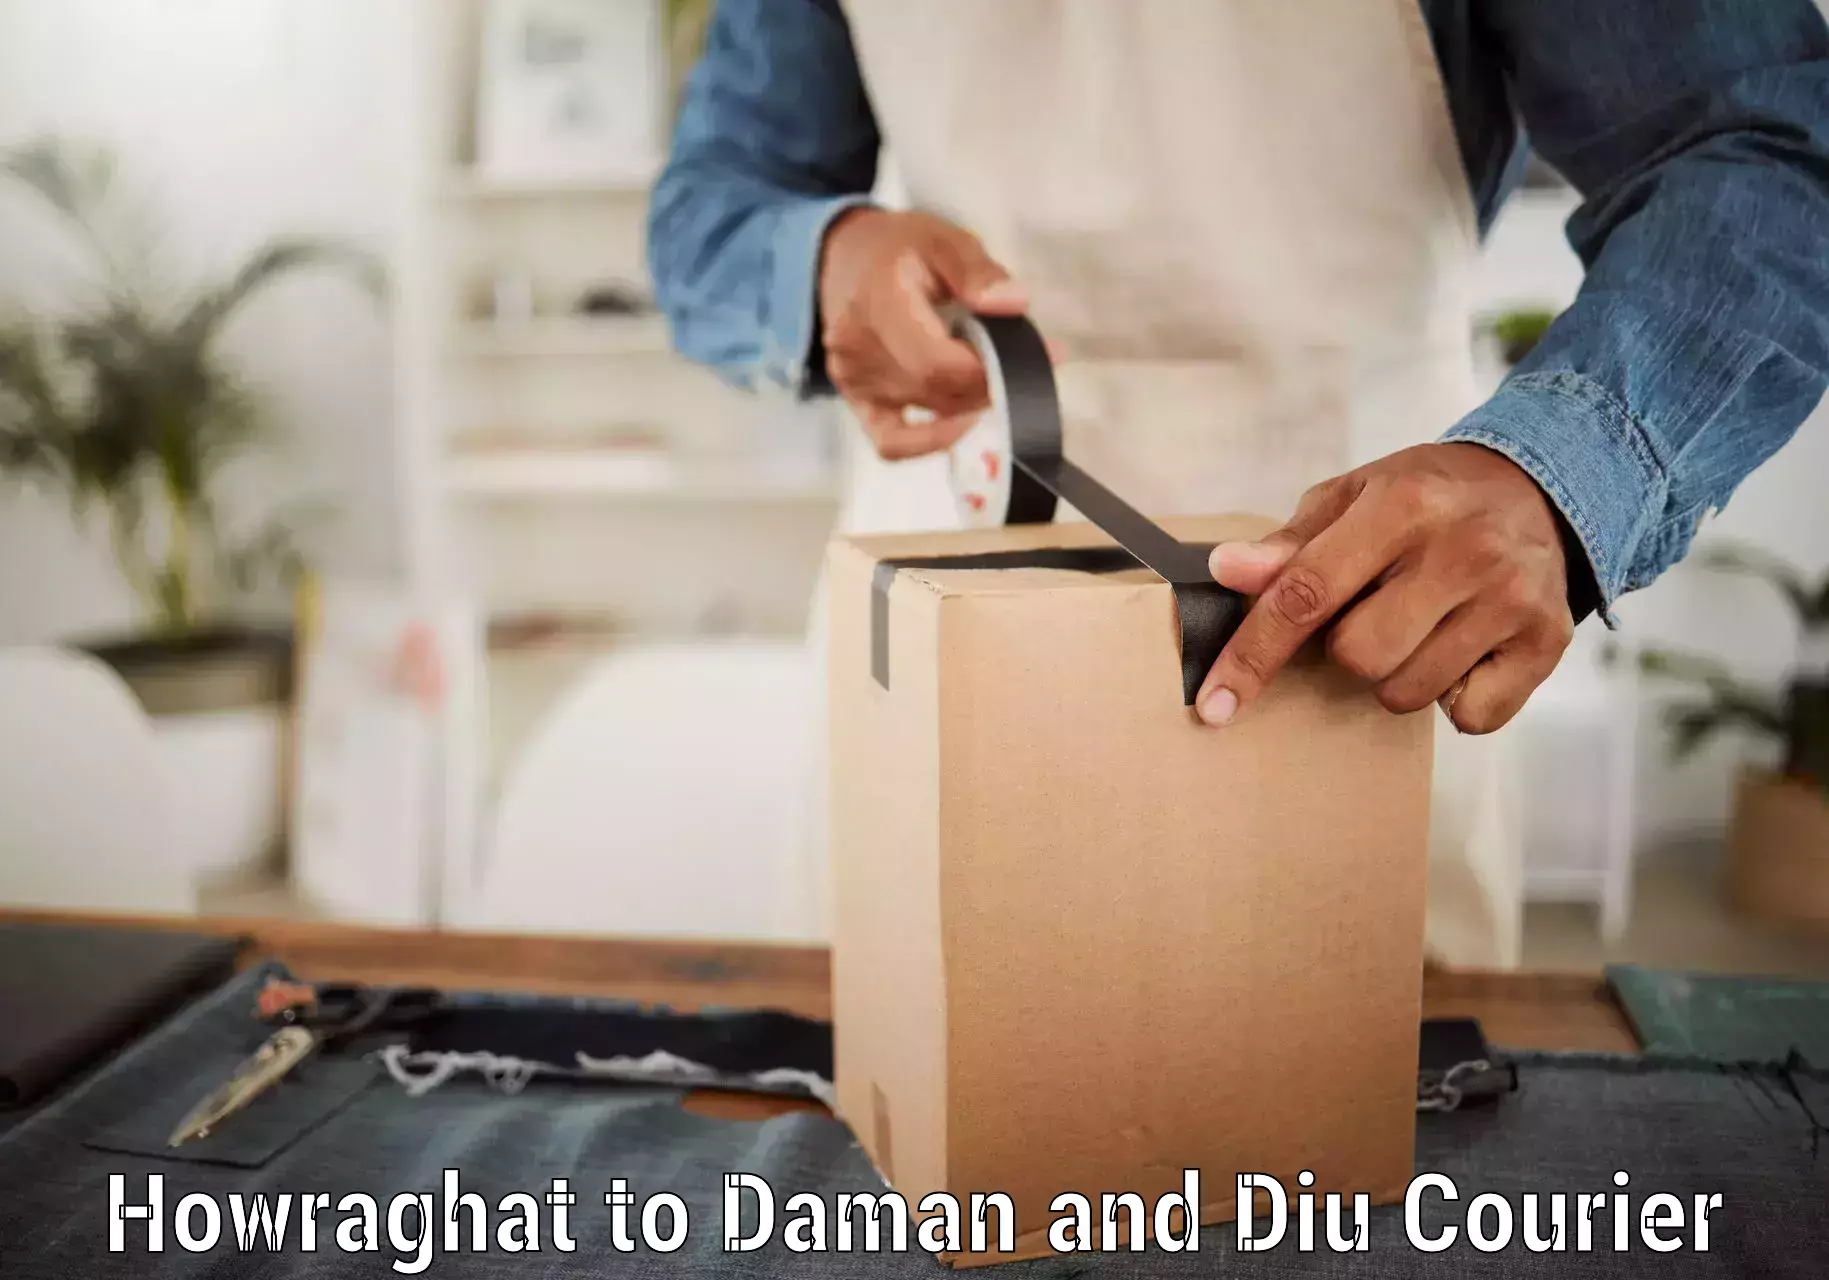 Multi-city courier Howraghat to Daman